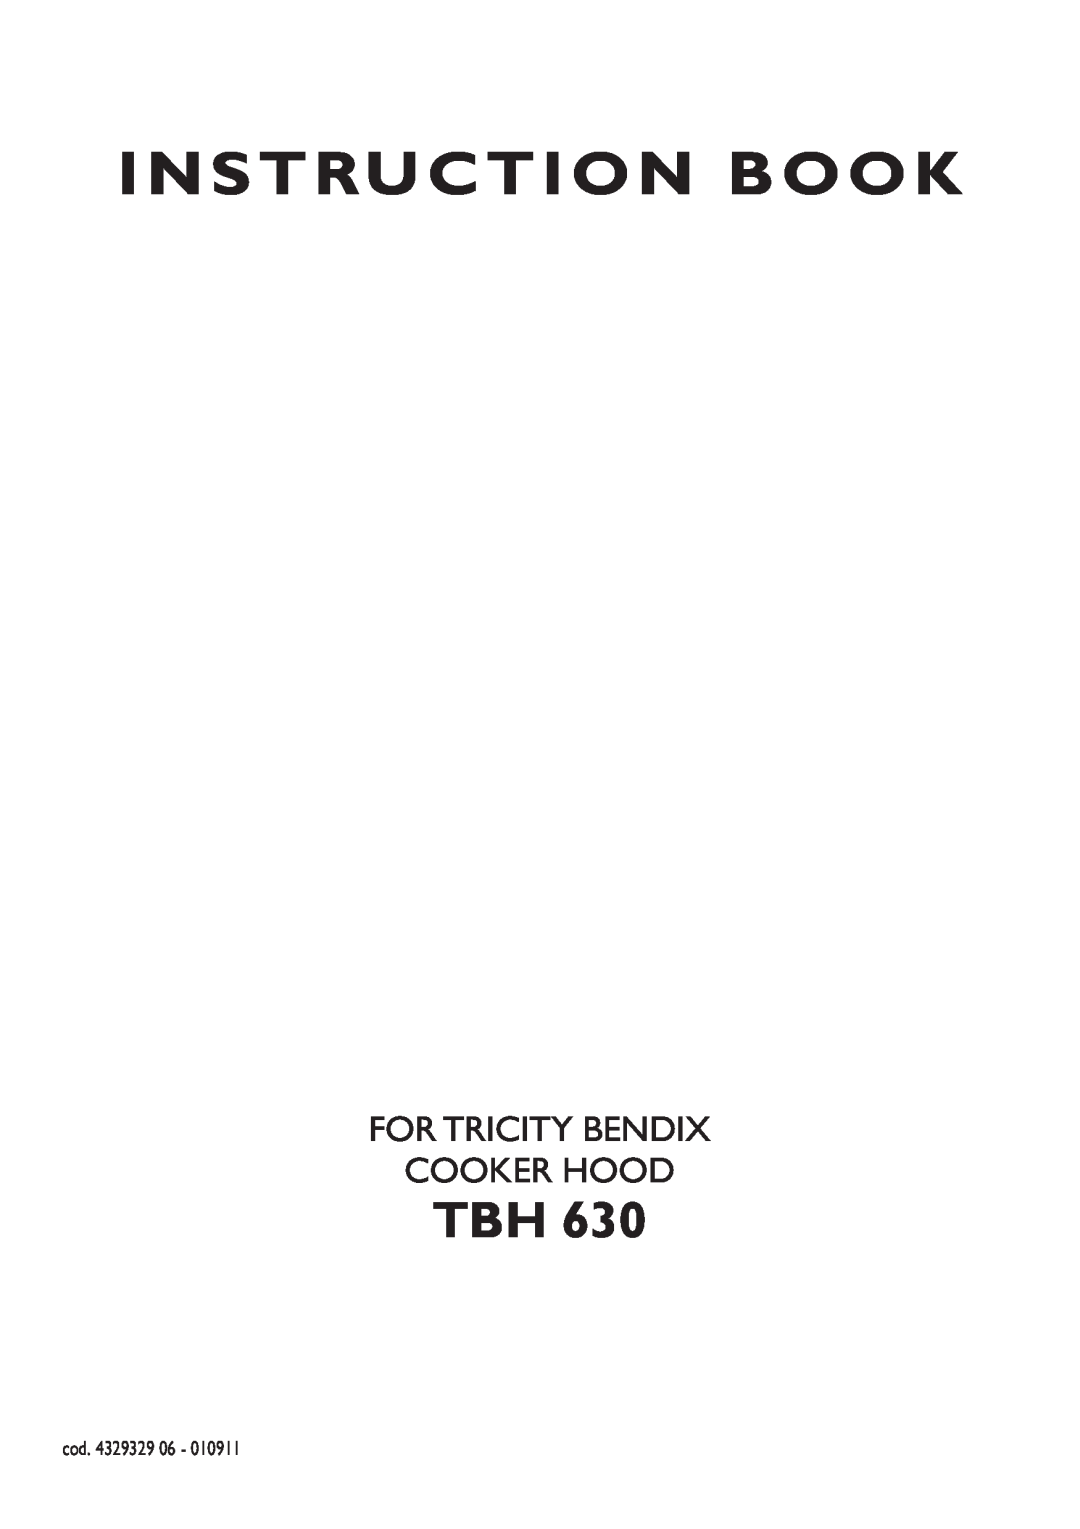 Tricity Bendix TBH 630 manual Instruction Book, For Tricity Bendix Cooker Hood 